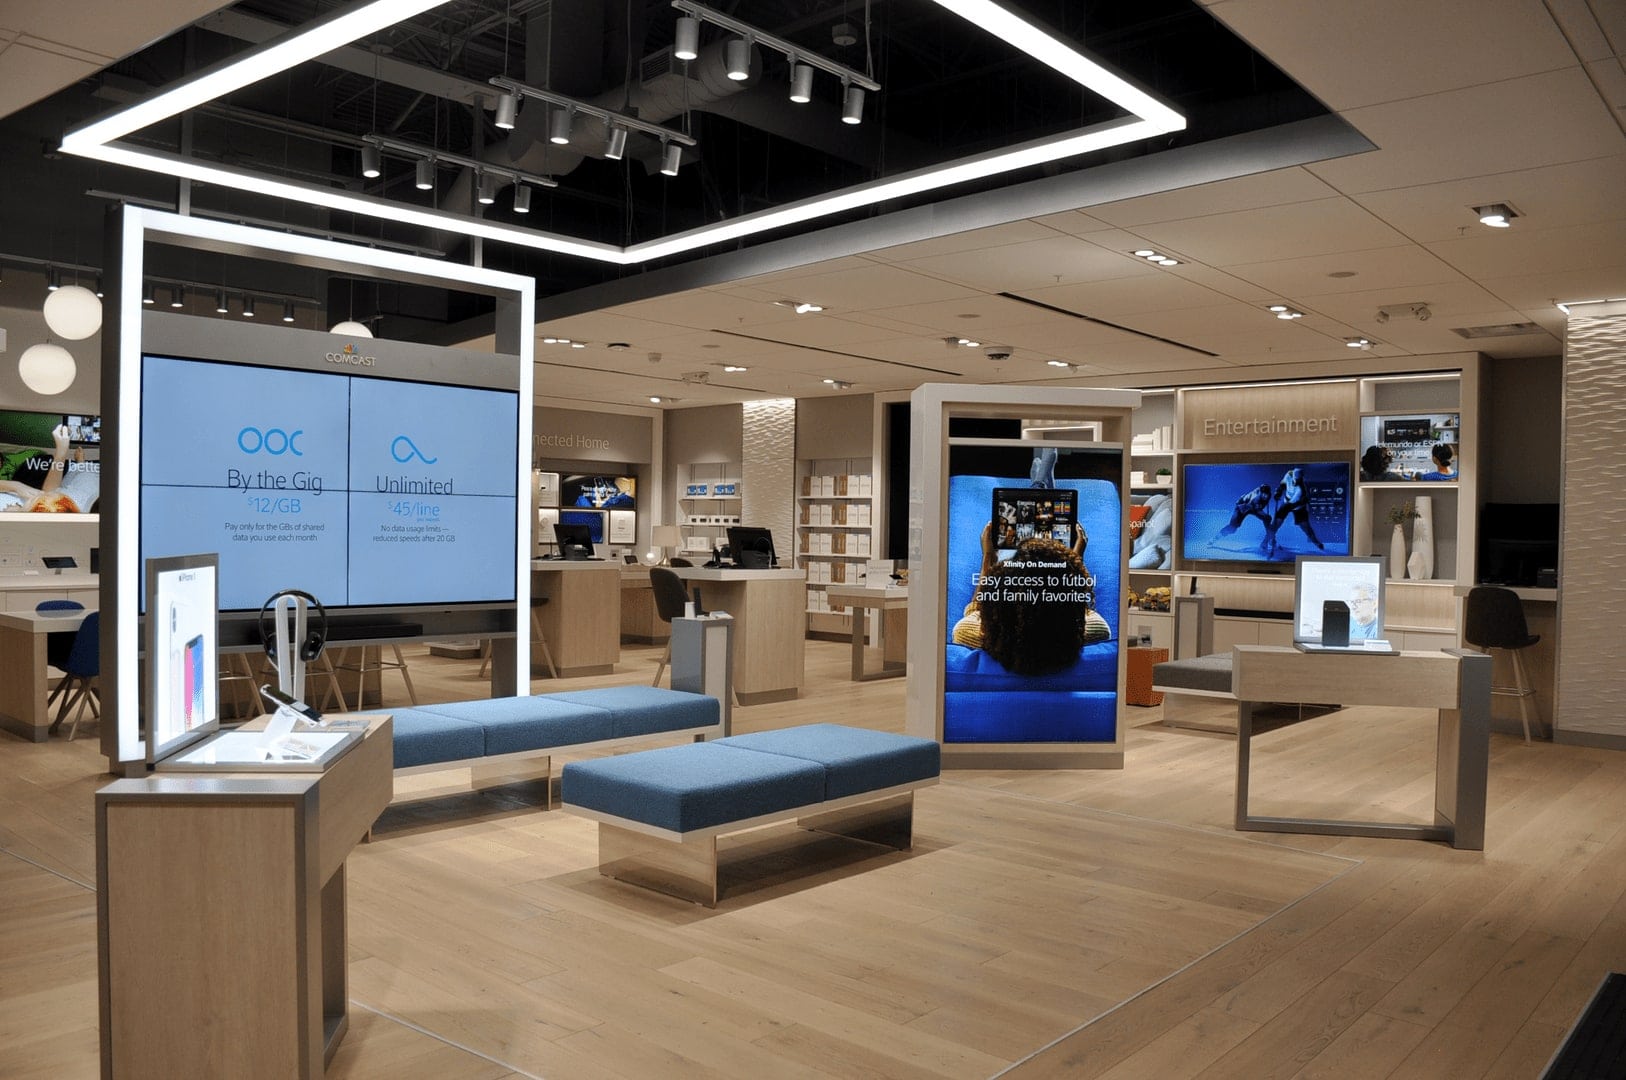 A beautifully designed interior of an Xfinity Comcast store that looks modern